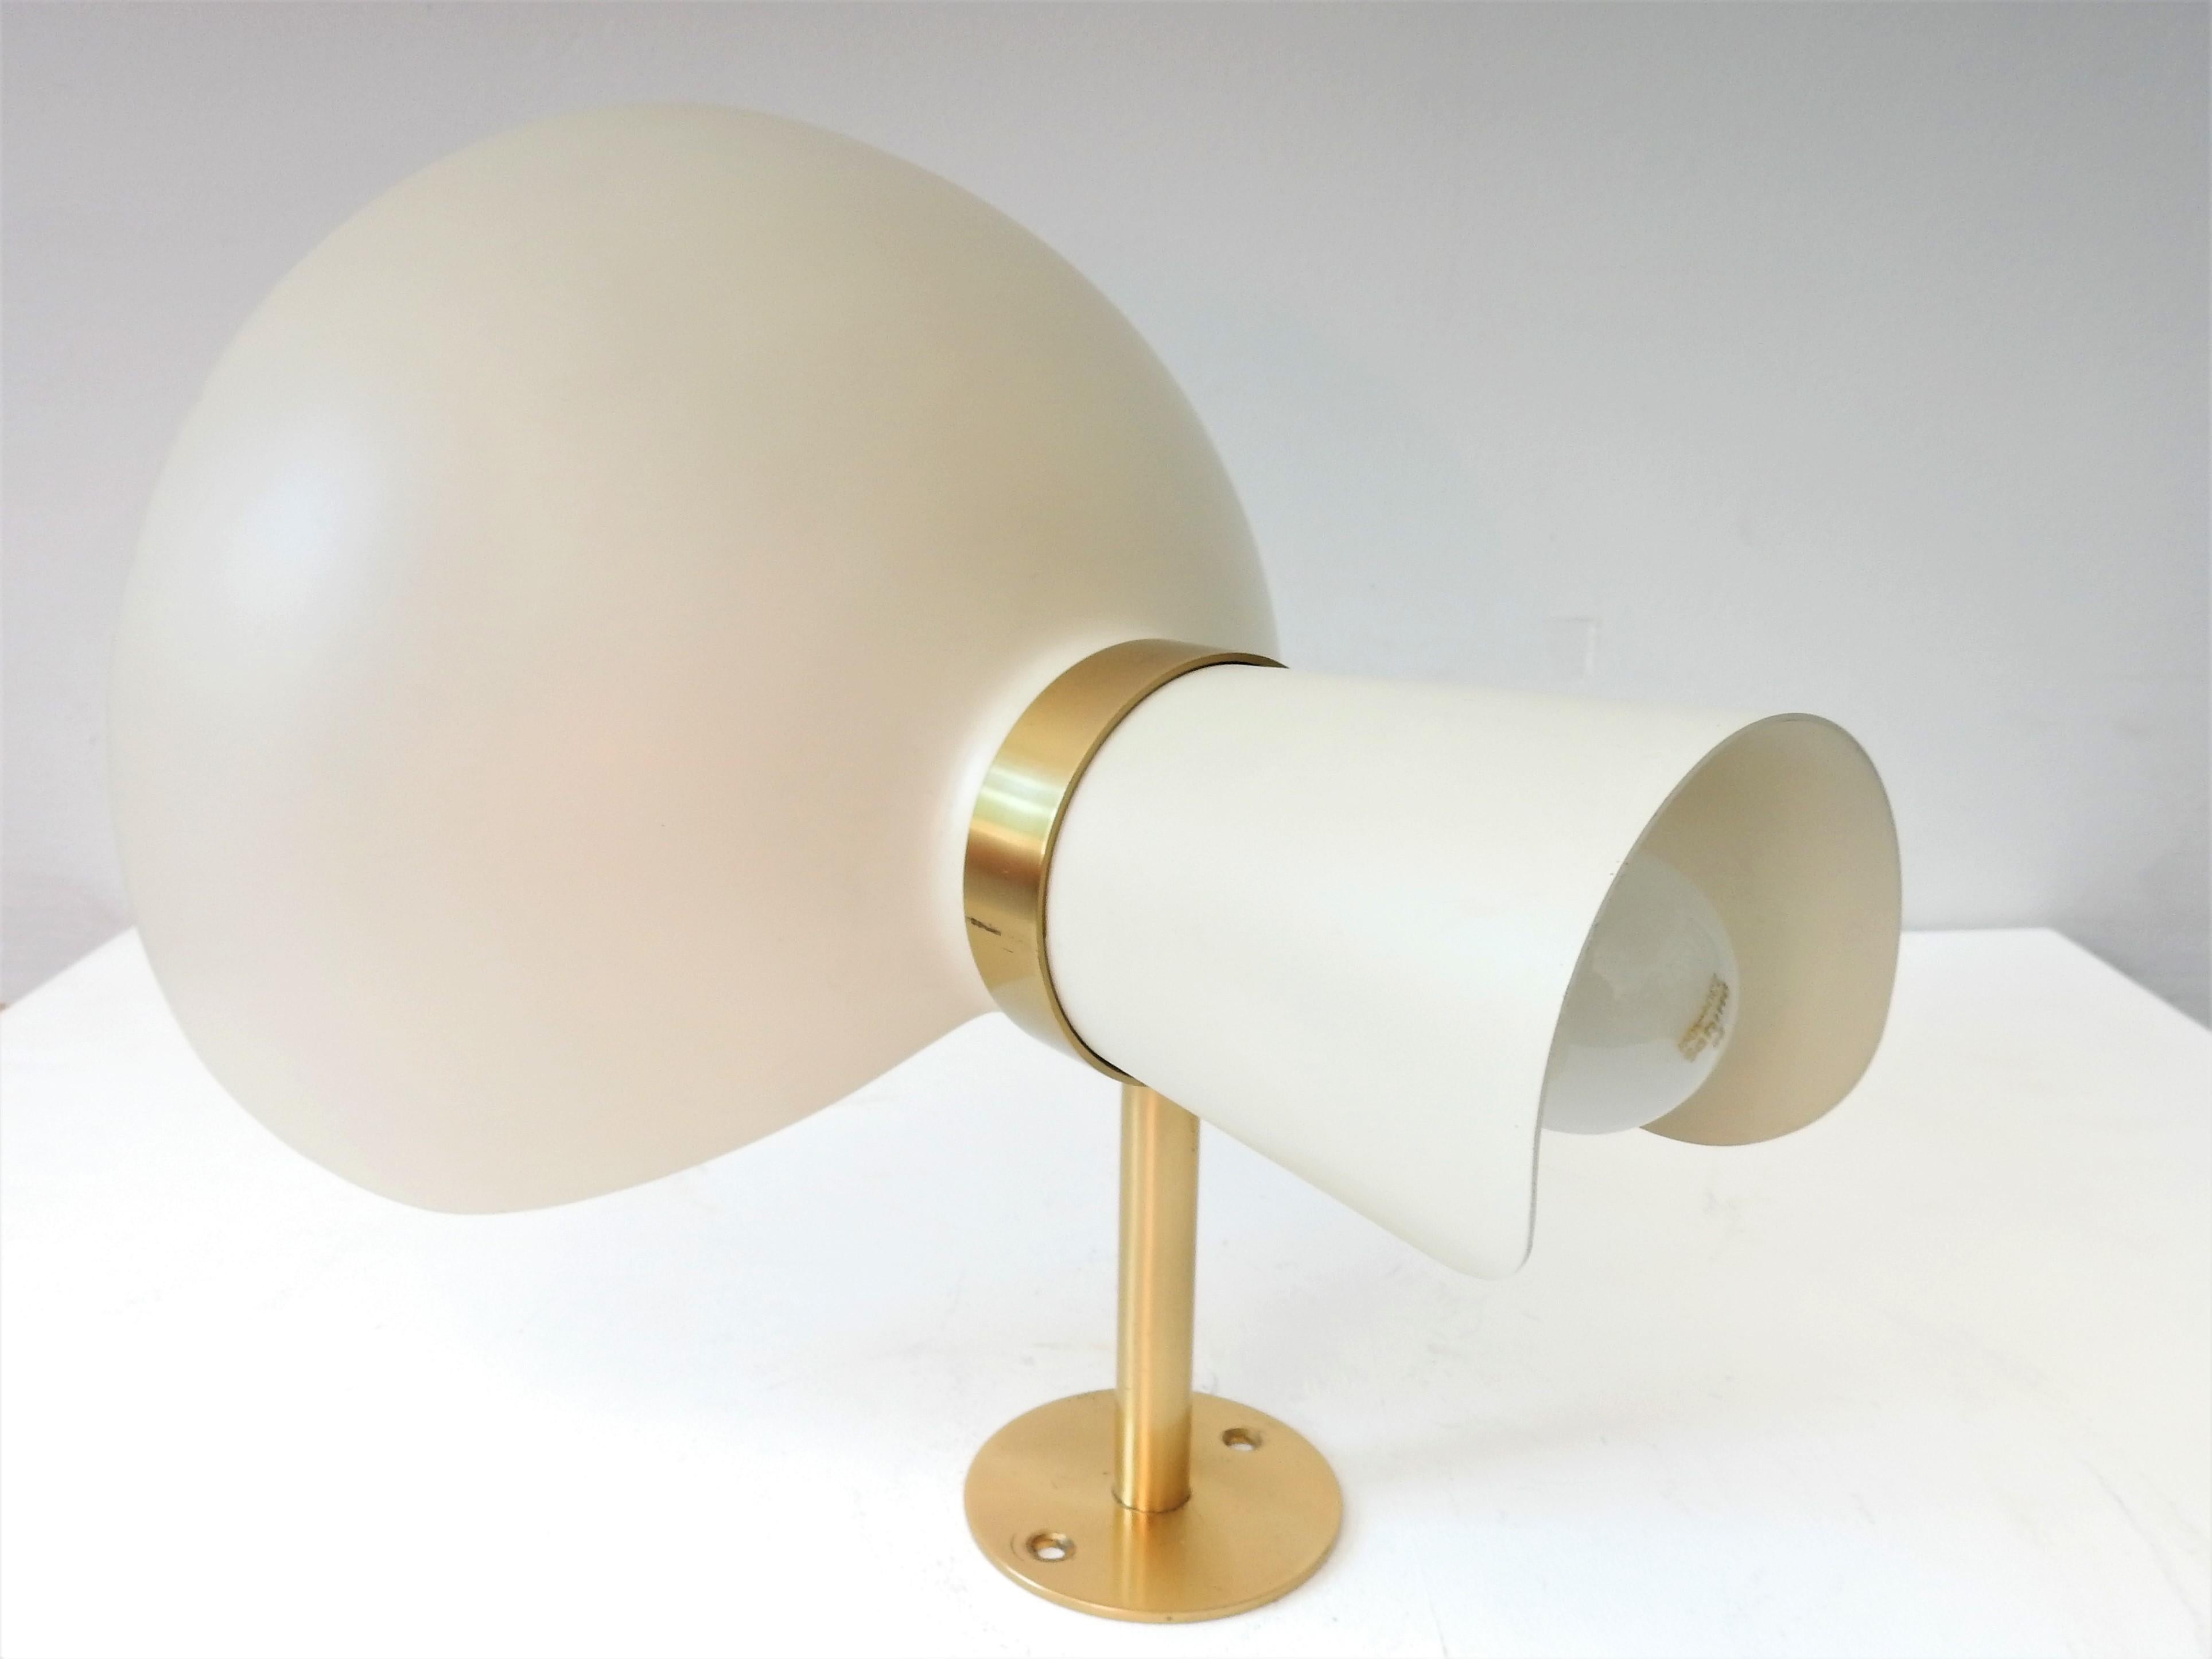 Italian Cream Colored Metal and Brass Diabolo Shaped Wall Lamp, 1960s